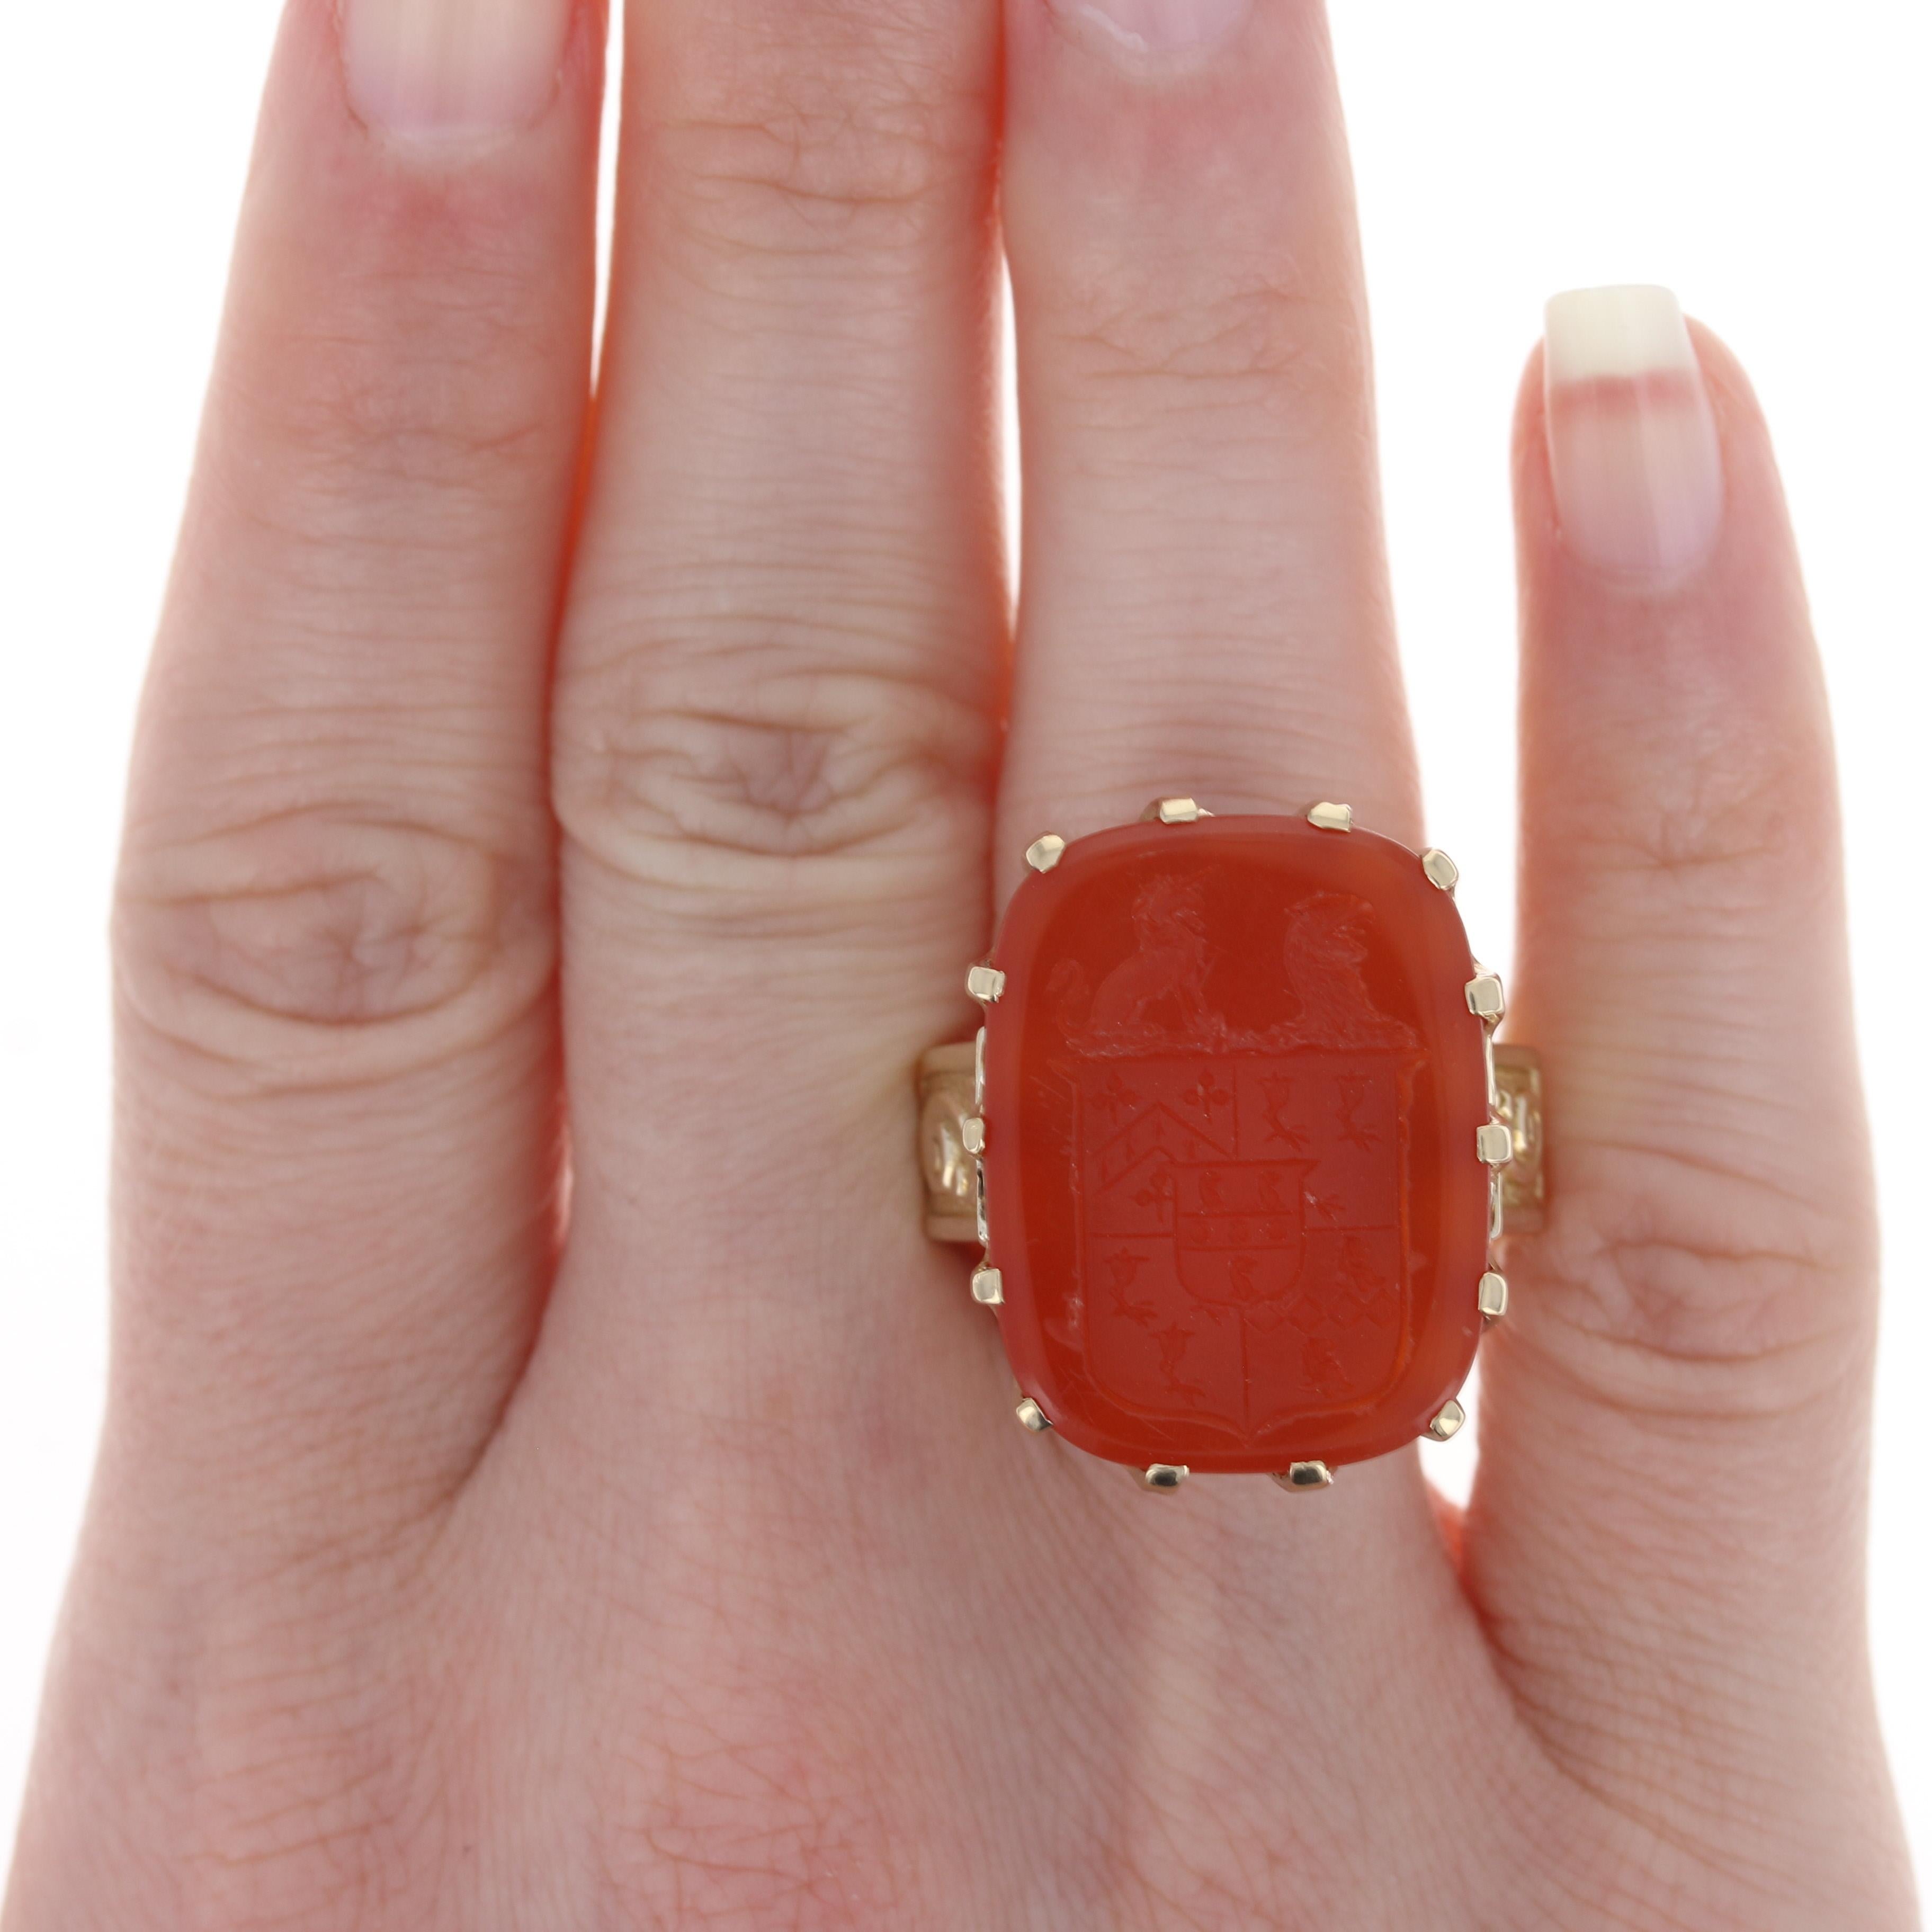 Marked by stately elegance and a bold style, this ring will be a stunning gift for the special man or woman in your life! This 14k yellow gold piece showcases a rectangular-shaped genuine carnelian that showcases an intricately carved rendering of a